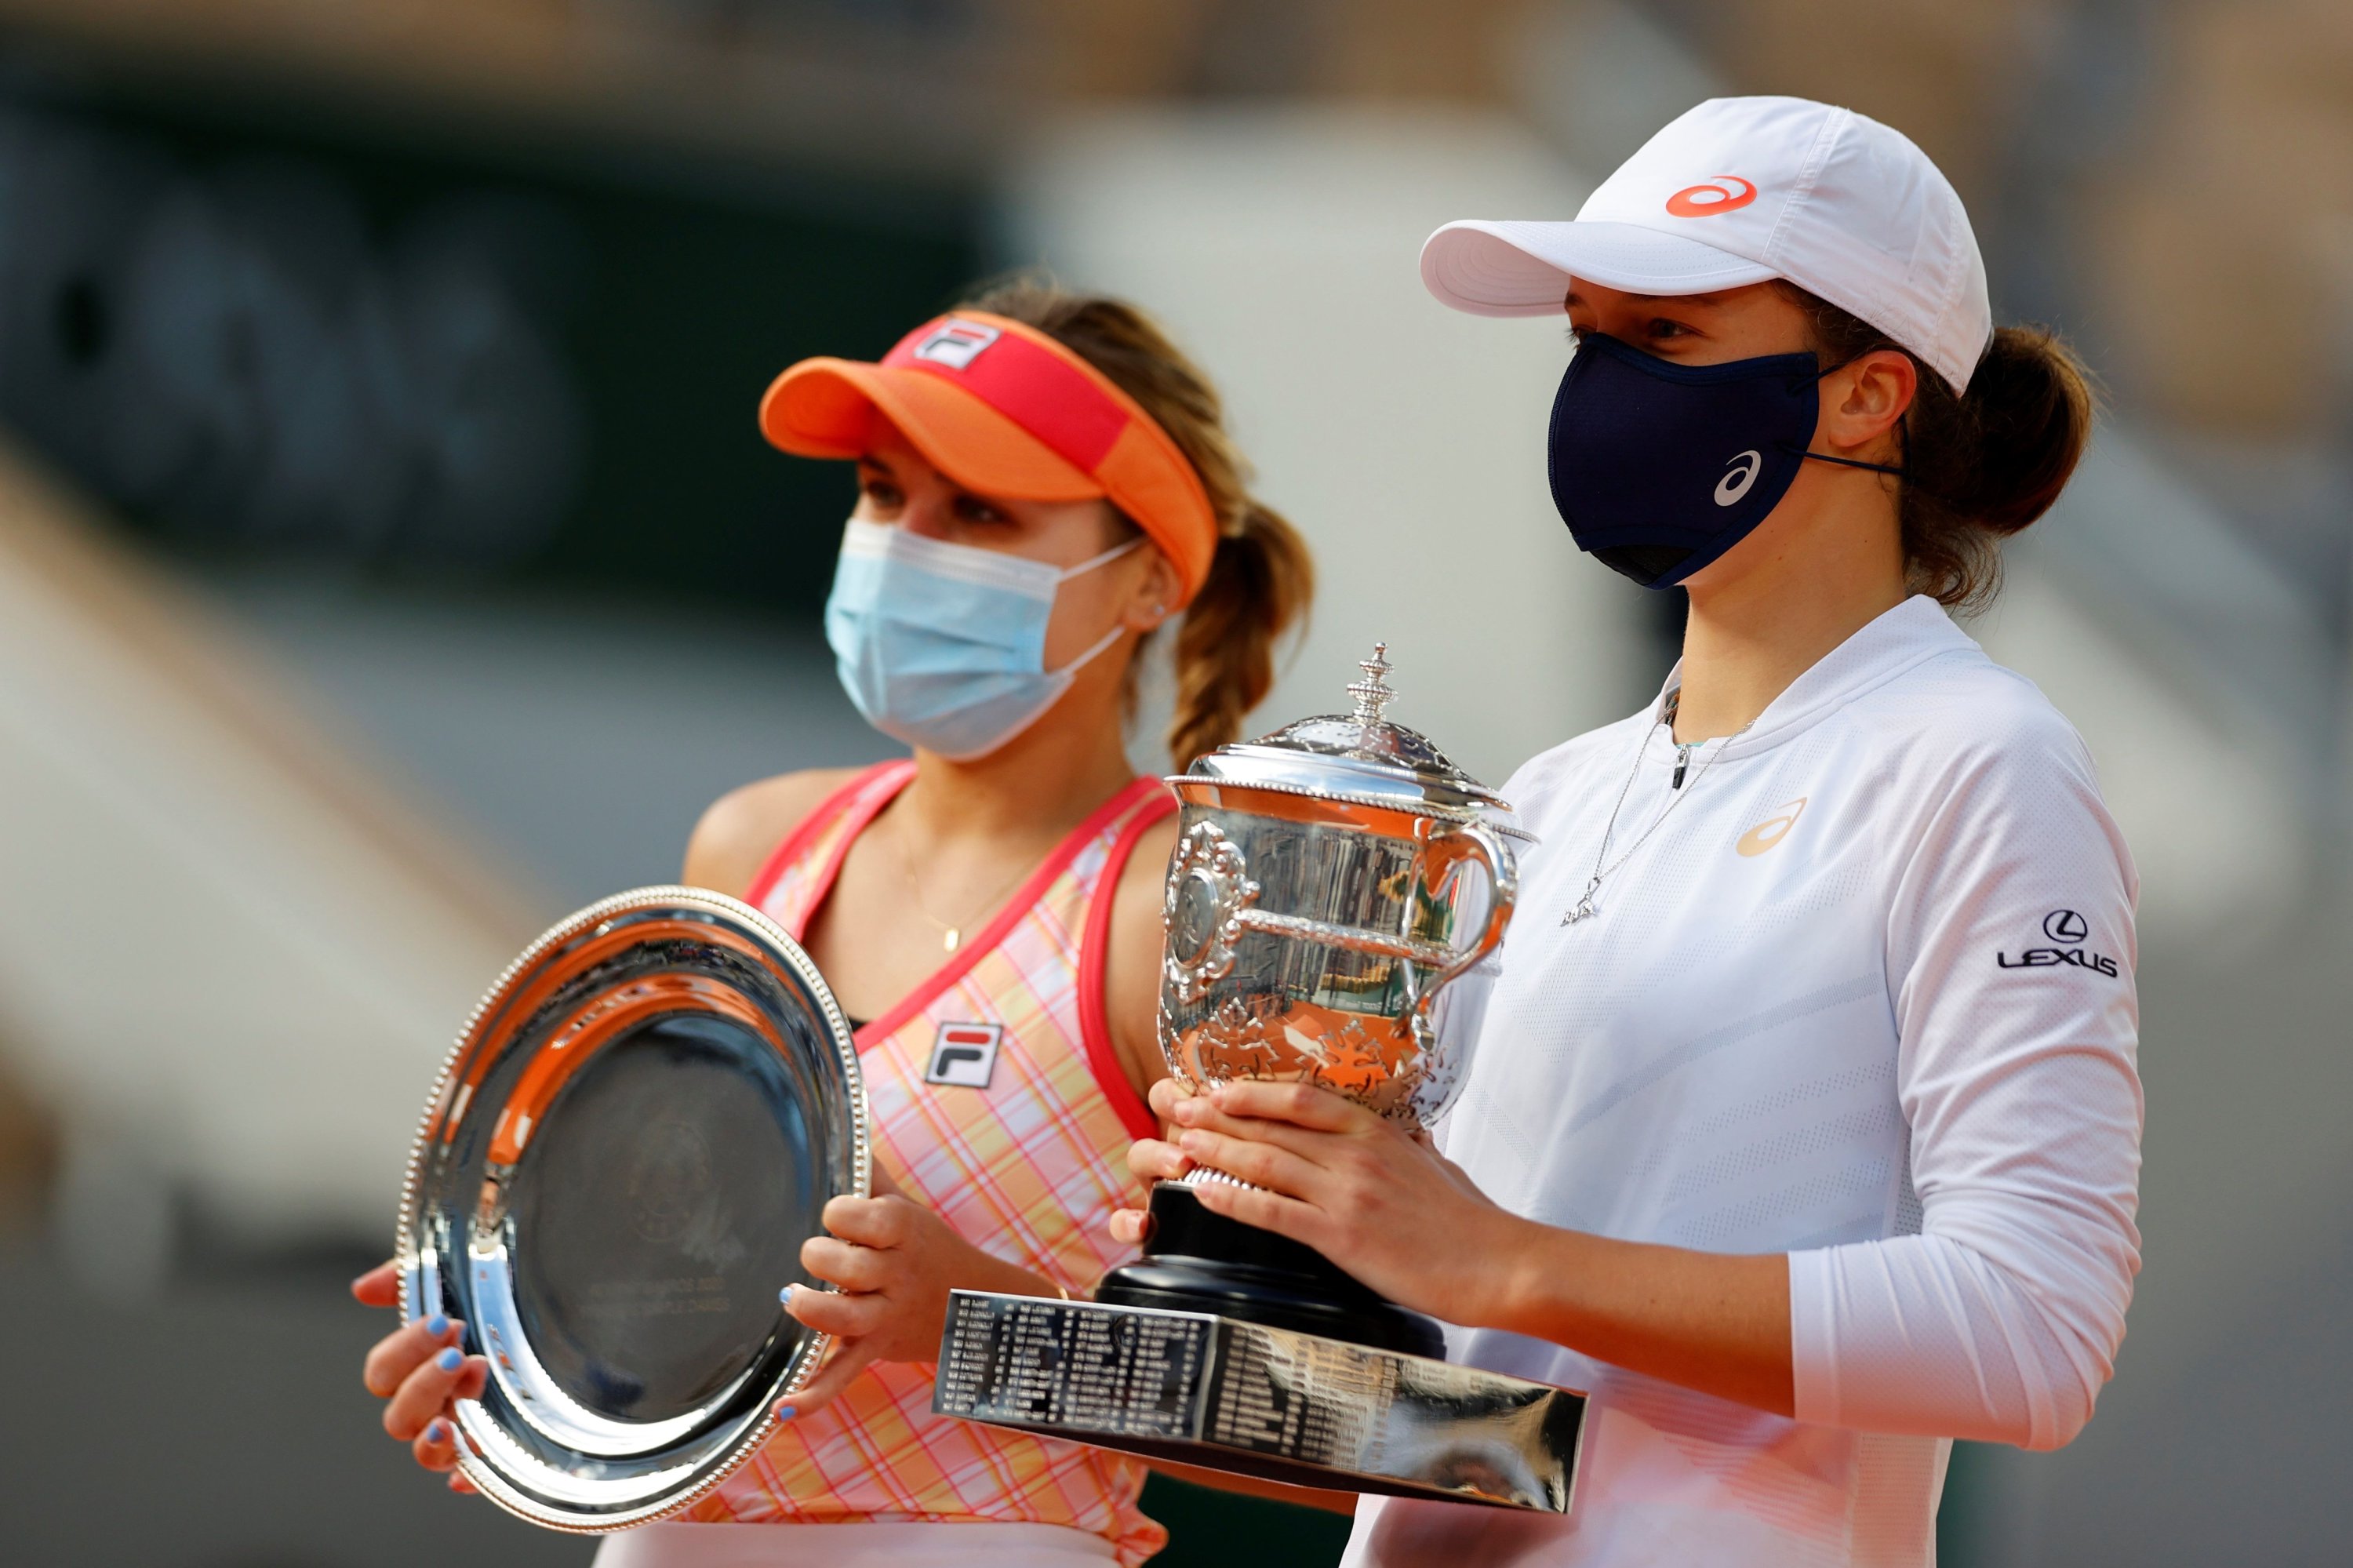 Second placed Sofia Kenin of the U.S. (L) and winner Poland's Iga Swiatek celebrate with their trophies during the podium ceremony after the women's singles final tennis match, at the Philippe Chatrier court, on Day 14 of The Roland Garros 2020 French Open tennis tournament in Paris on October 10, 2020. (AFP Photo)